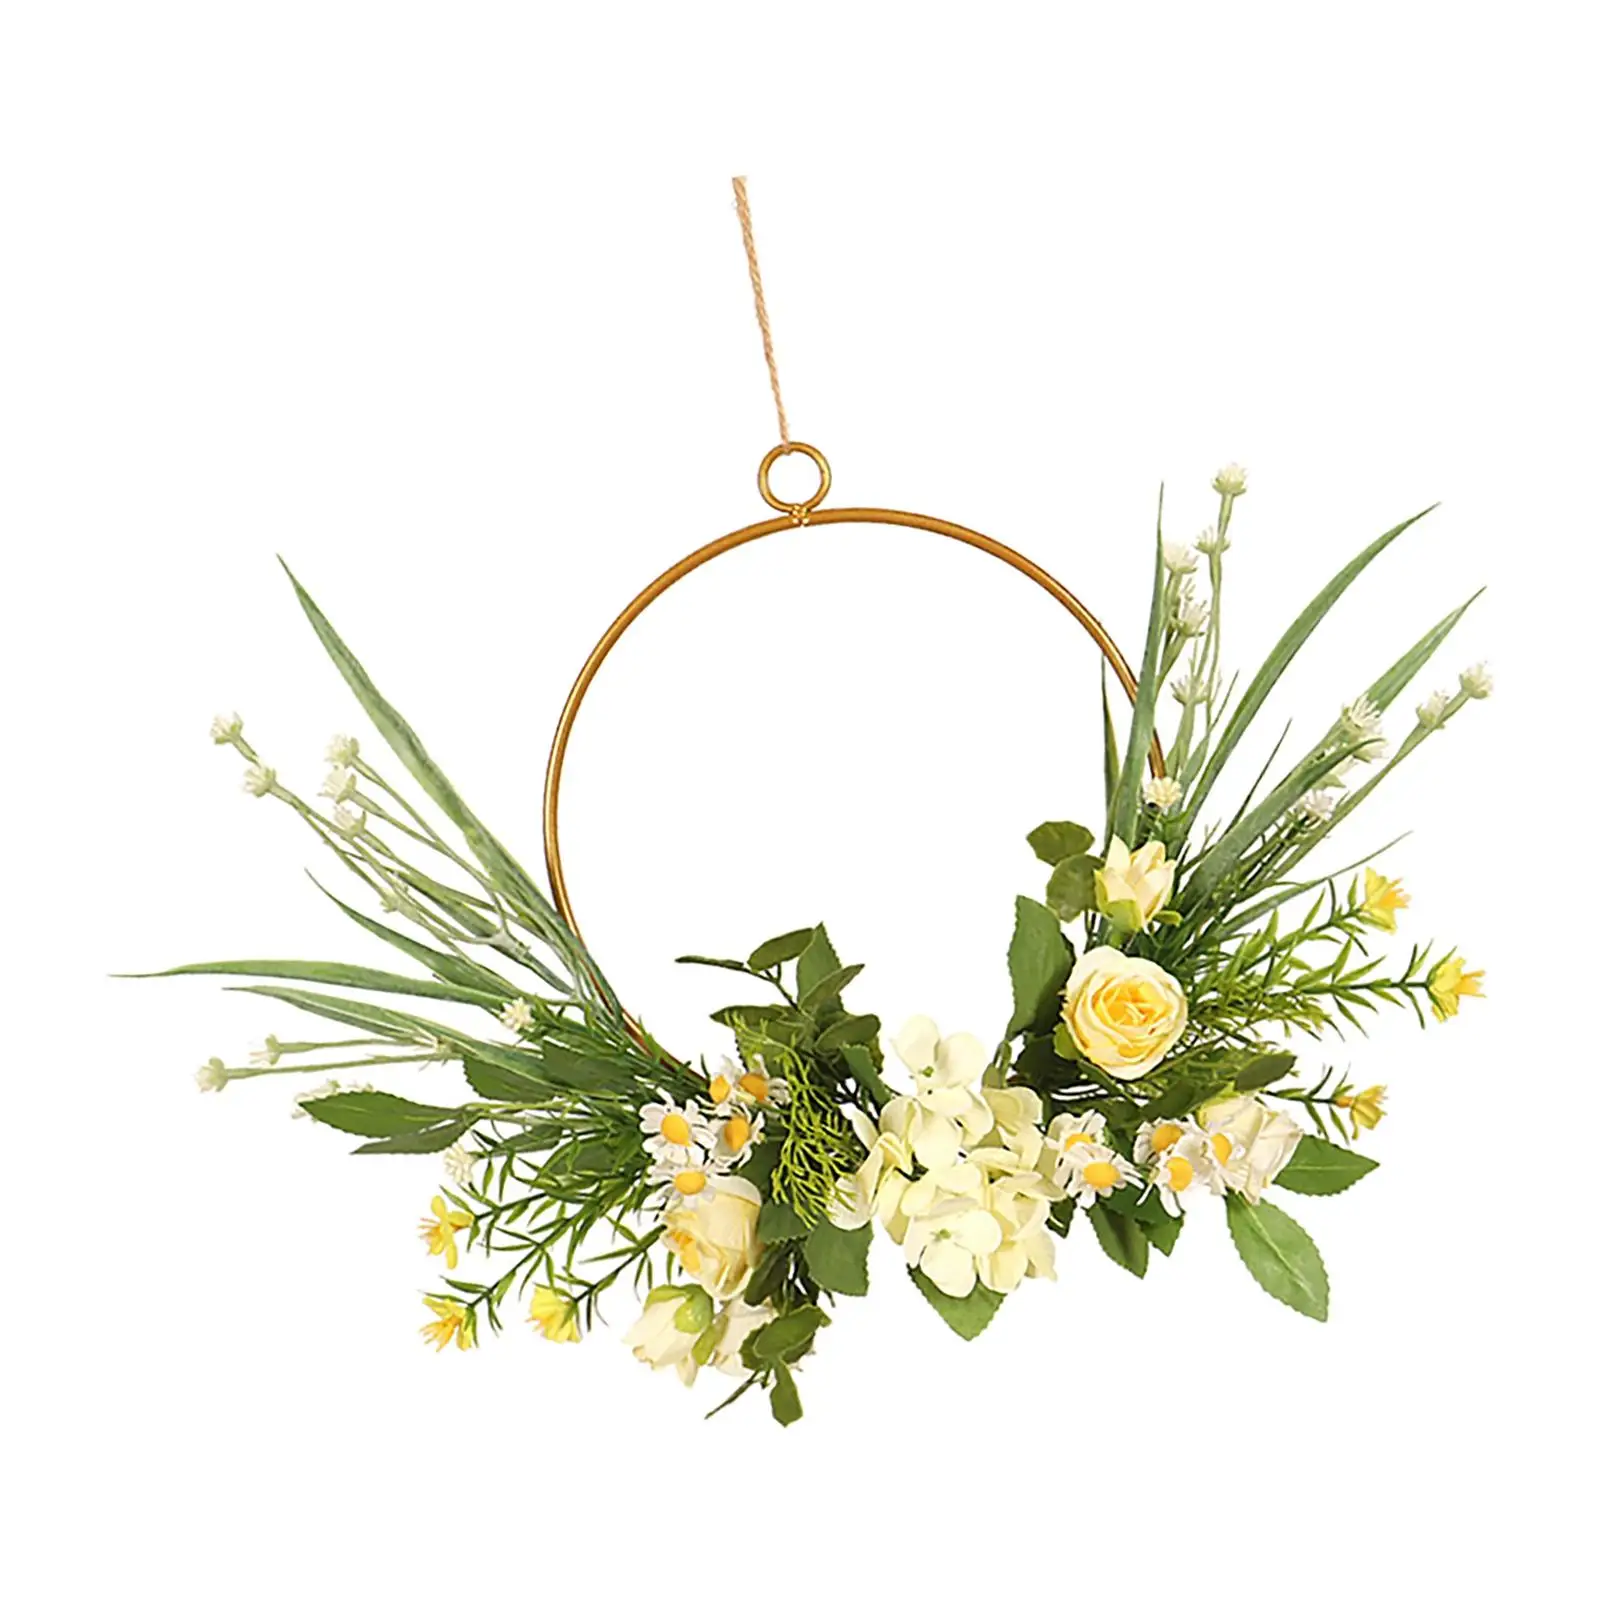 Welcome Floral Hoop Wreath Artificial Hanging Garland for Party Window Outdoor Yard Decor